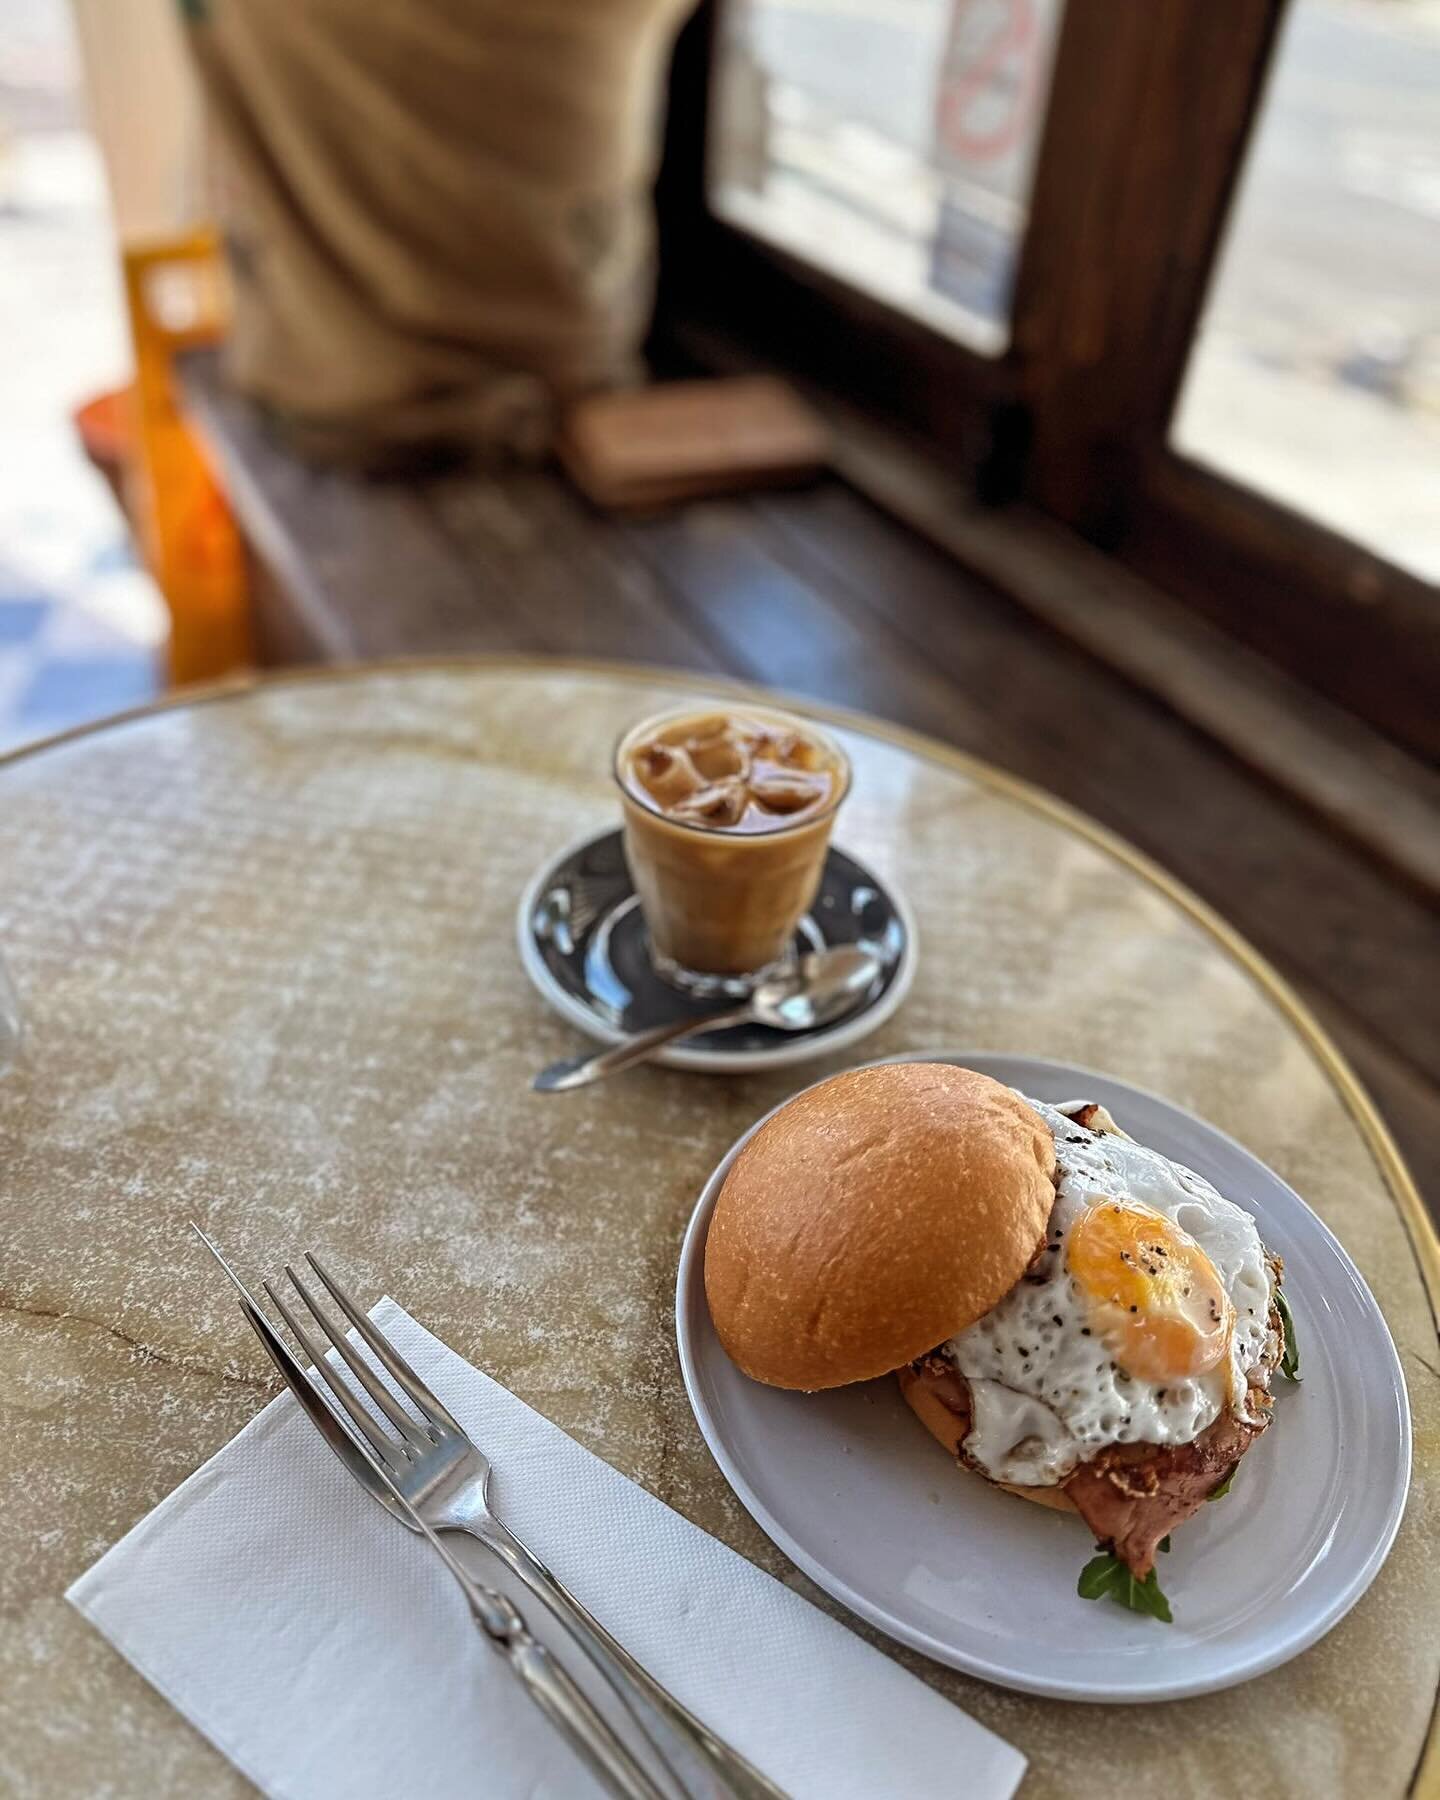 Who doesn&rsquo;t love starting their day with a bacon and egg roll and a coffee&hellip; heaven in Annandale ☕️ #baconandeggroll #sydneycoffeeshop #annandalecafe